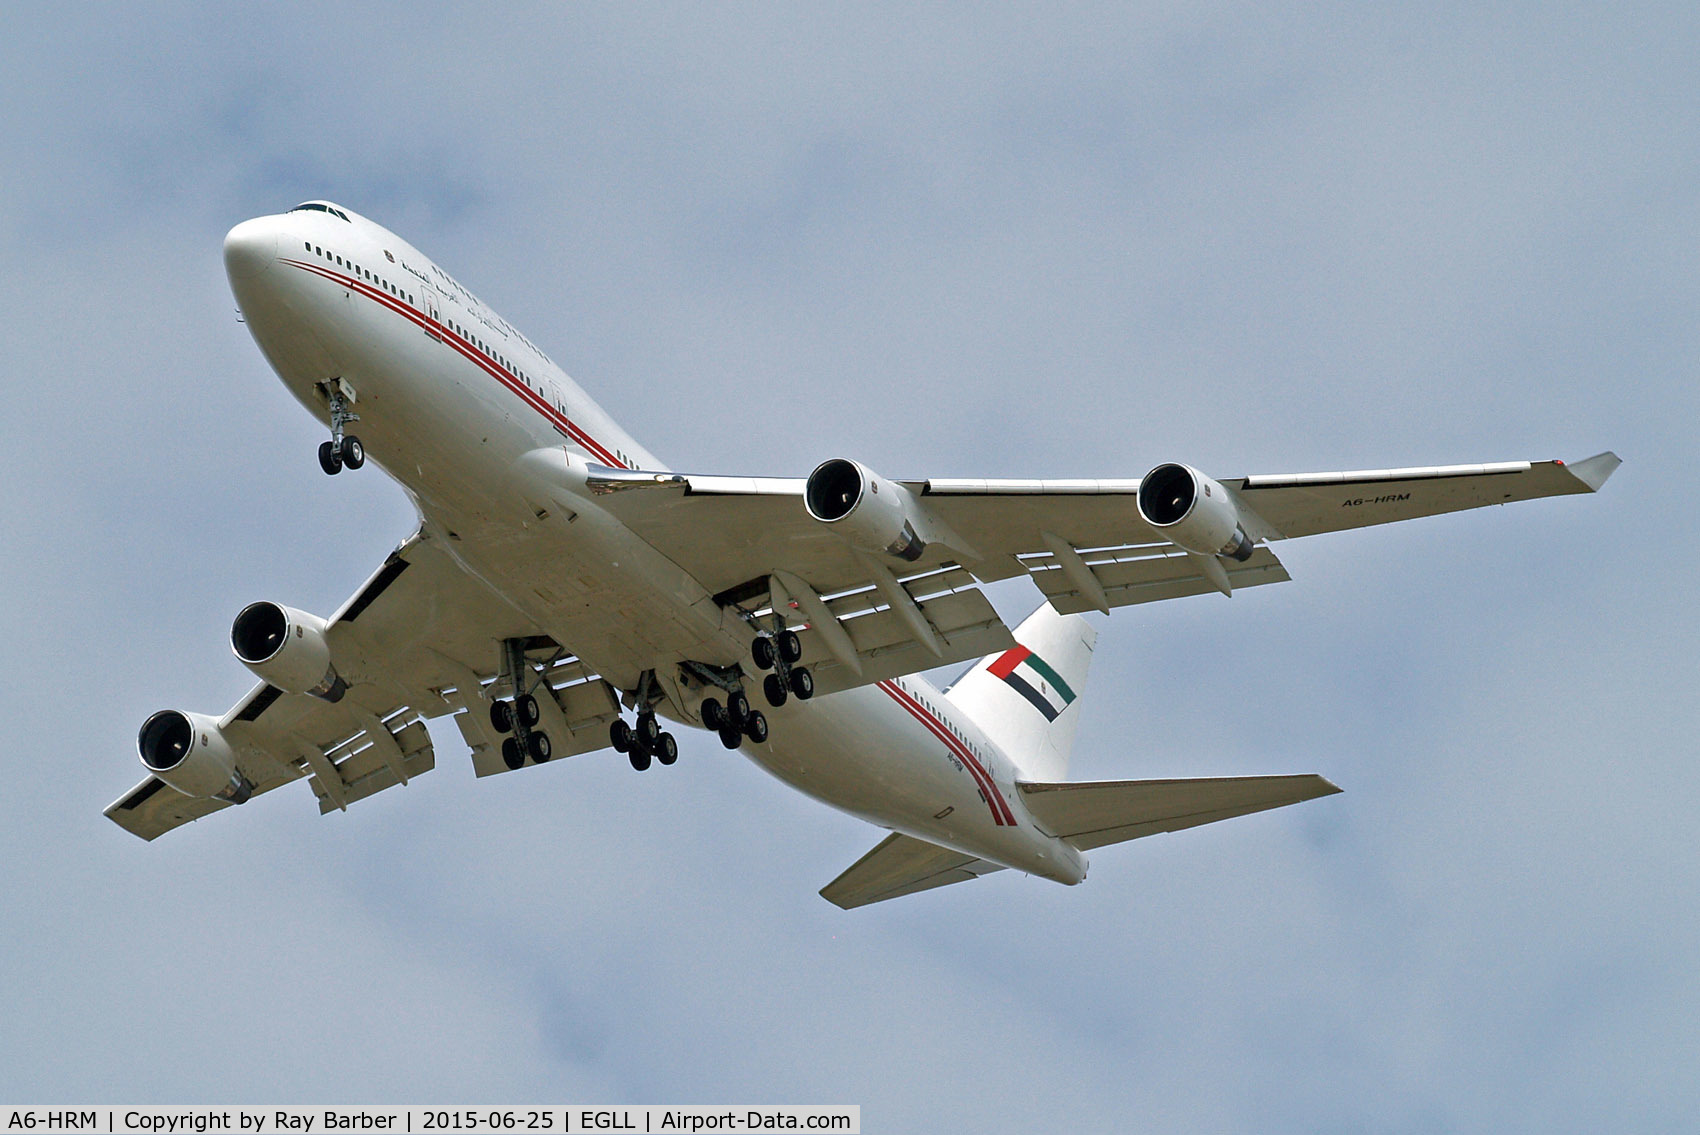 A6-HRM, 1998 Boeing 747-422 C/N 26903, Boeing 747-422 [26903] (Dubai Government) Home~G 25/06/2015. On approach 27R.